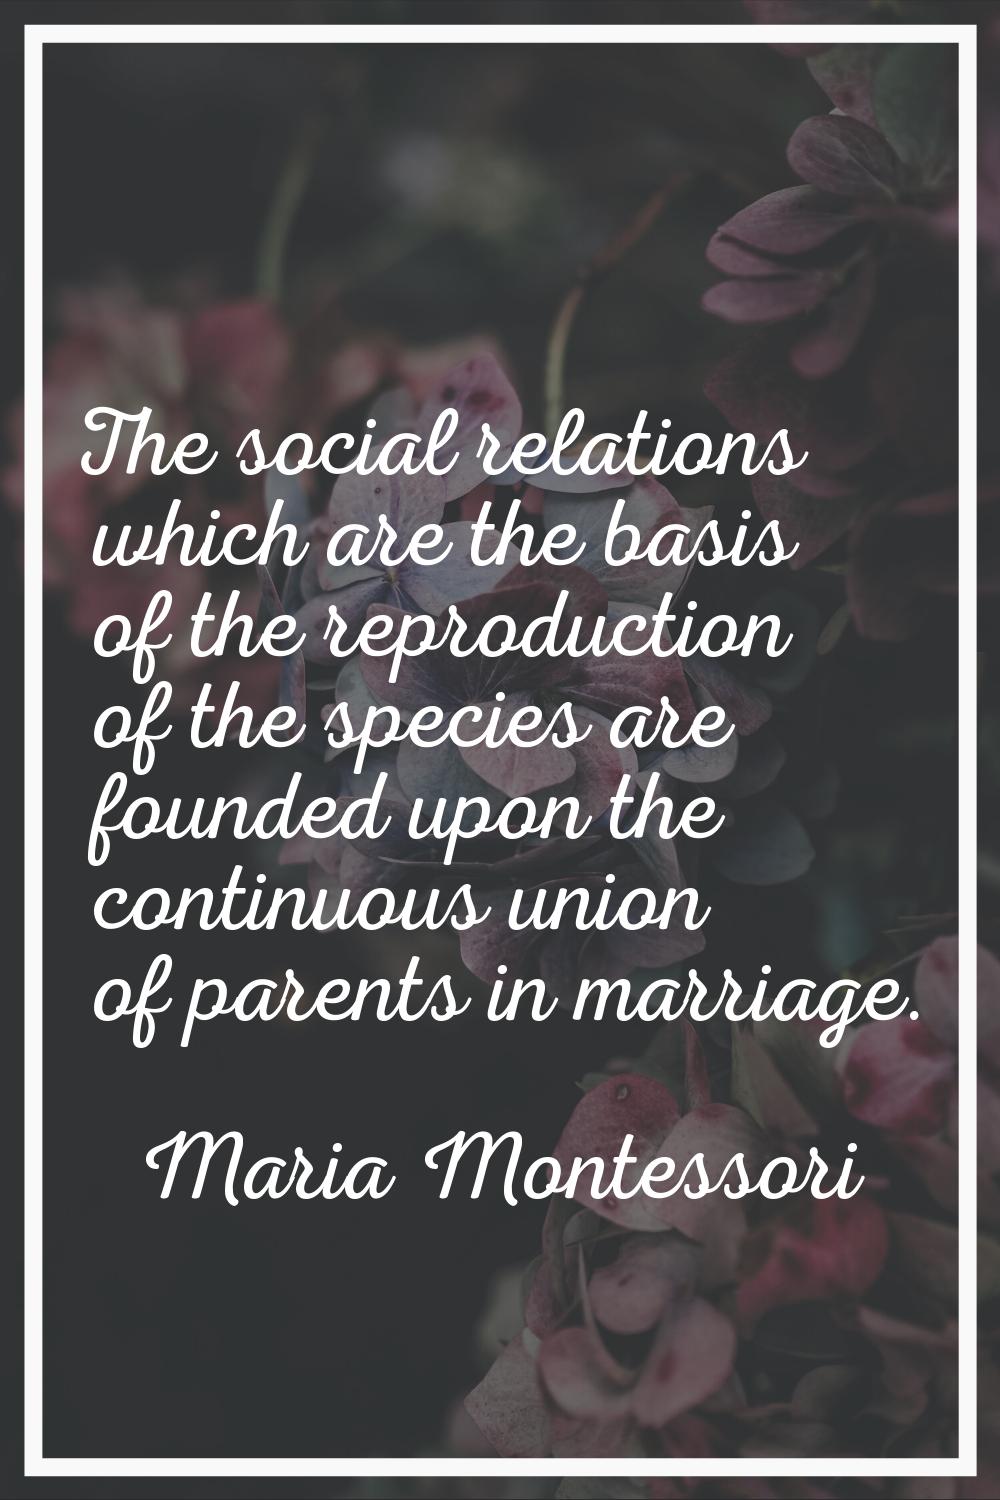 The social relations which are the basis of the reproduction of the species are founded upon the co